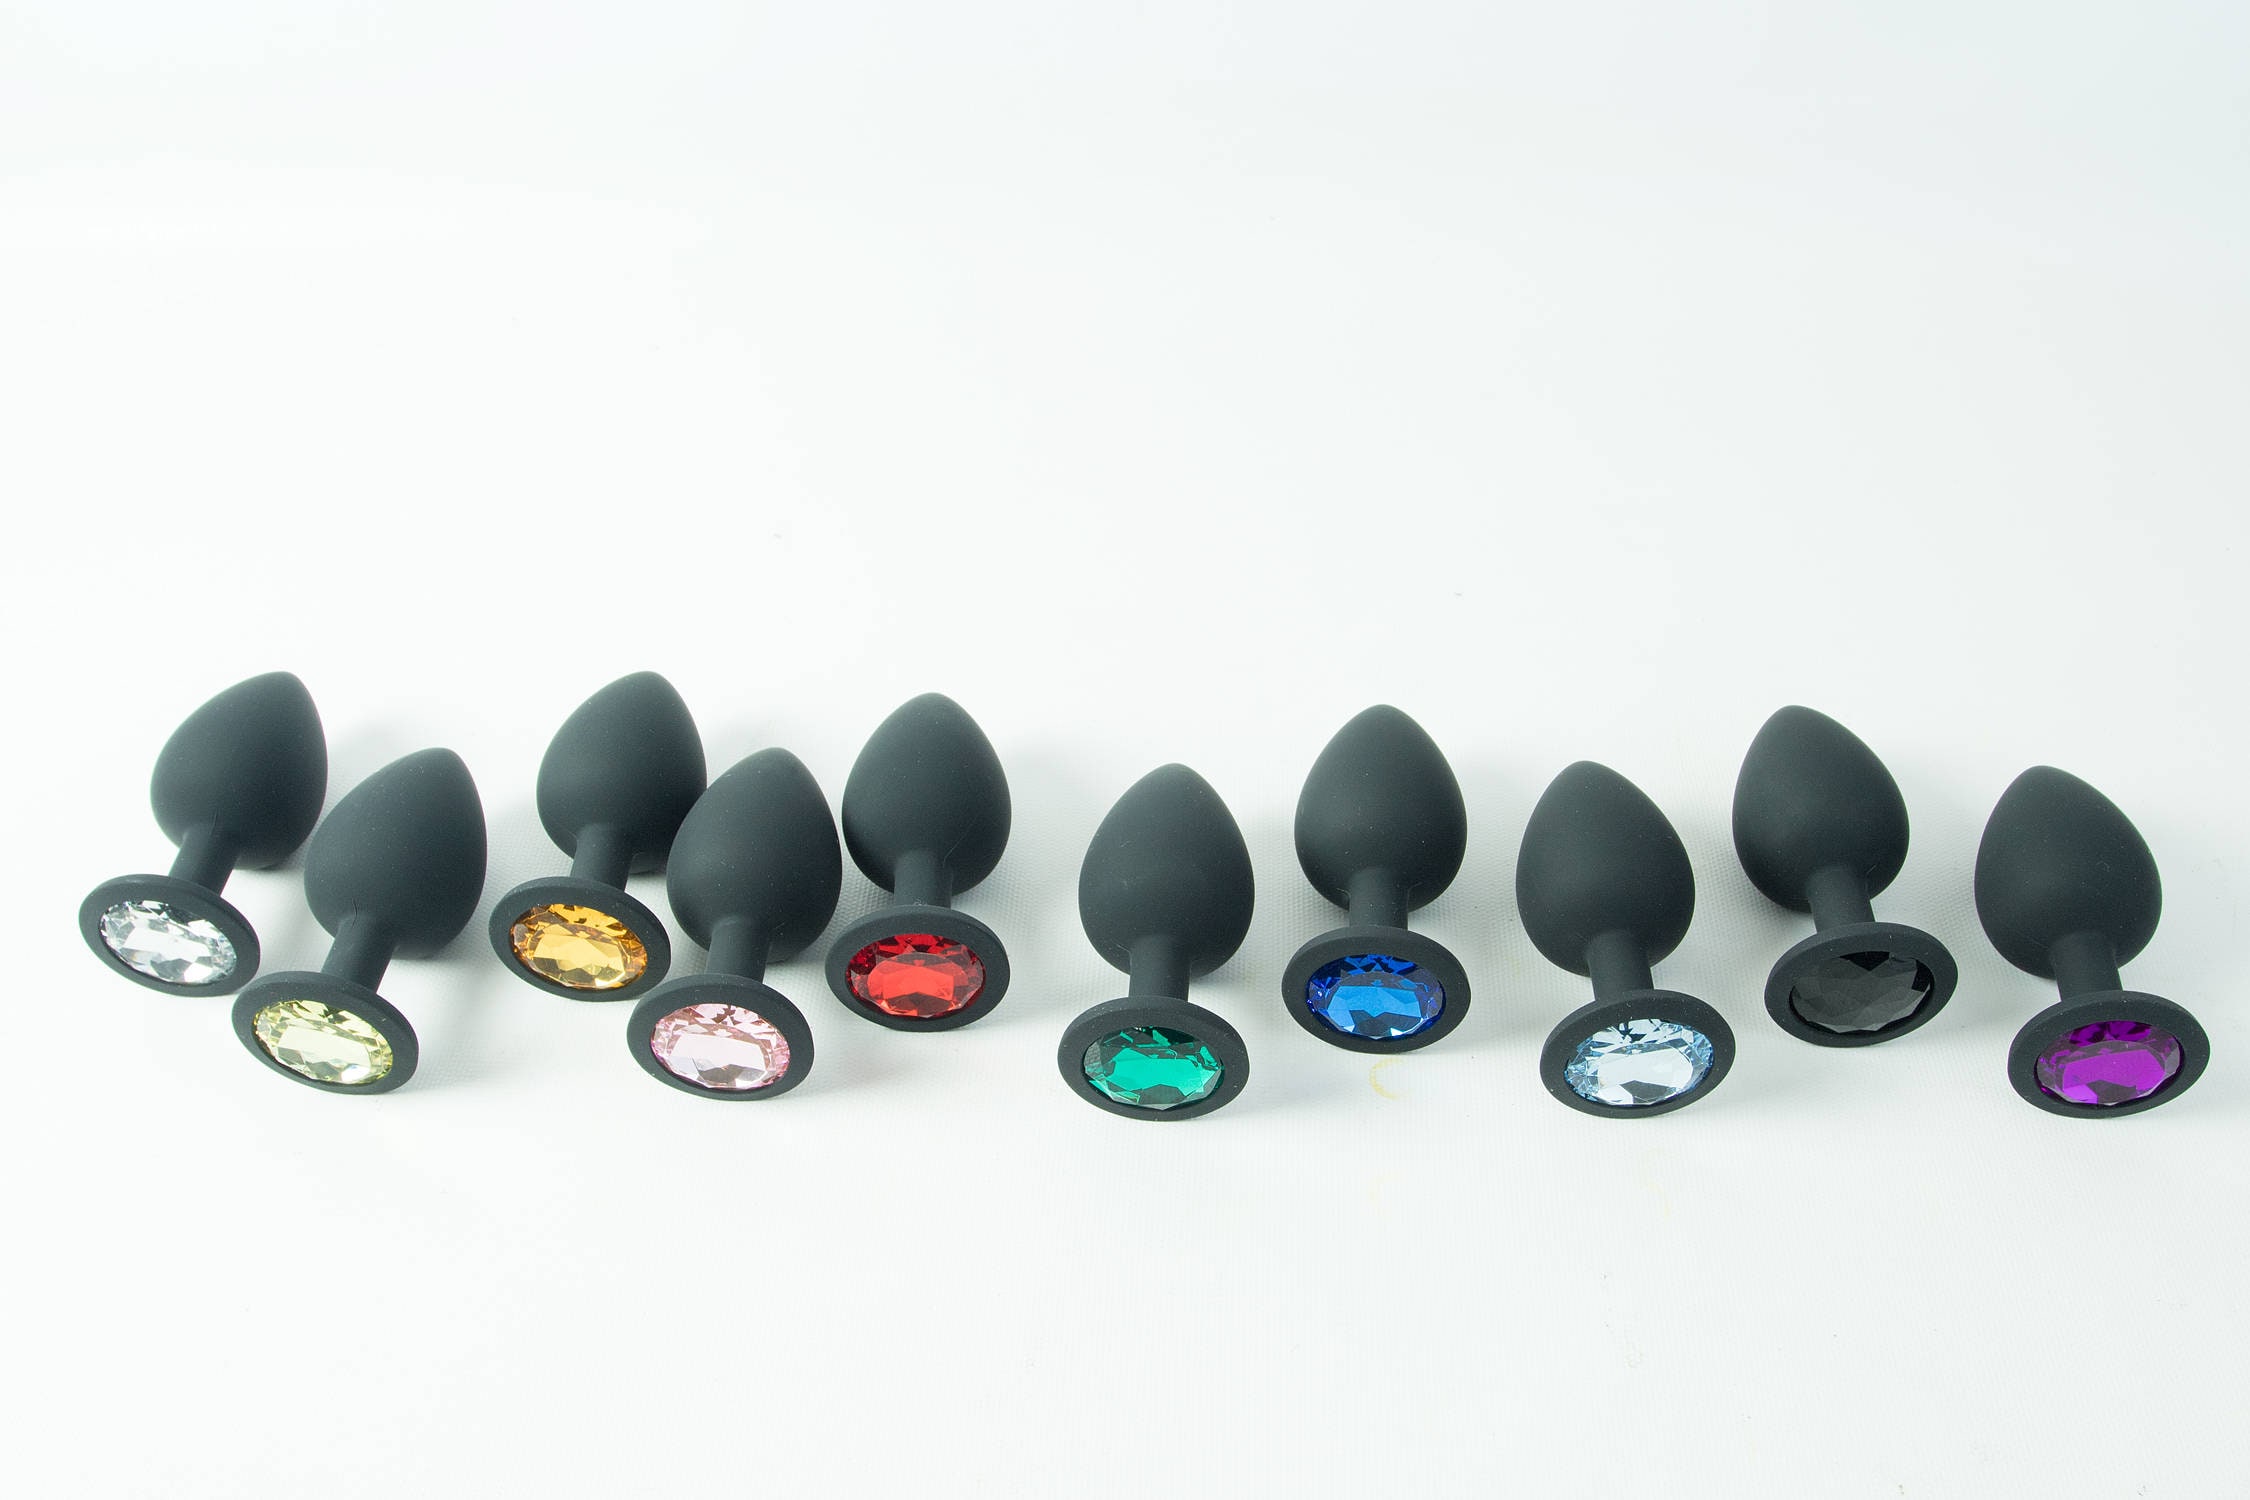 Mature Large Black Silicone Jeweled Anal Plug Butt Play Bdsm 